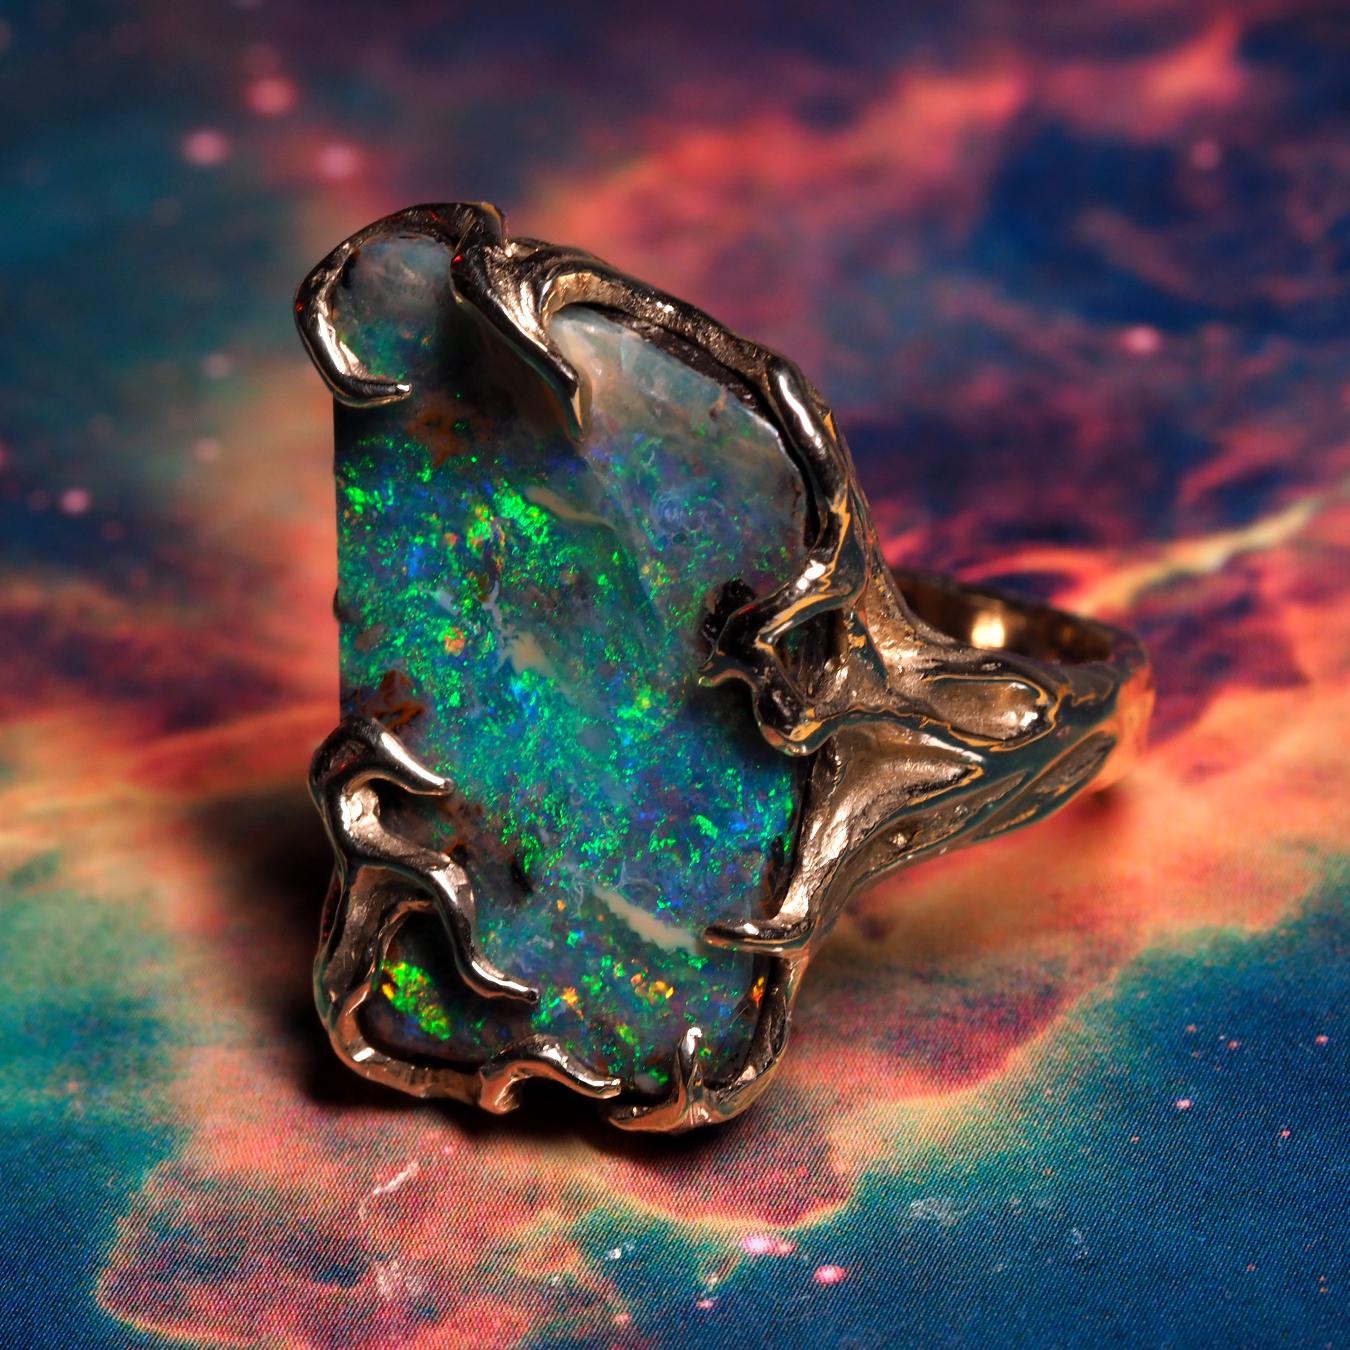 This ring with its magical design and mesmerizing Boulder Opal gemstone will surely make you fall in love with it. Crafted from 14K Gold, this ring reflects the supreme artistic craftsmanship with the Boulder Opal having a gorgeous play of colors